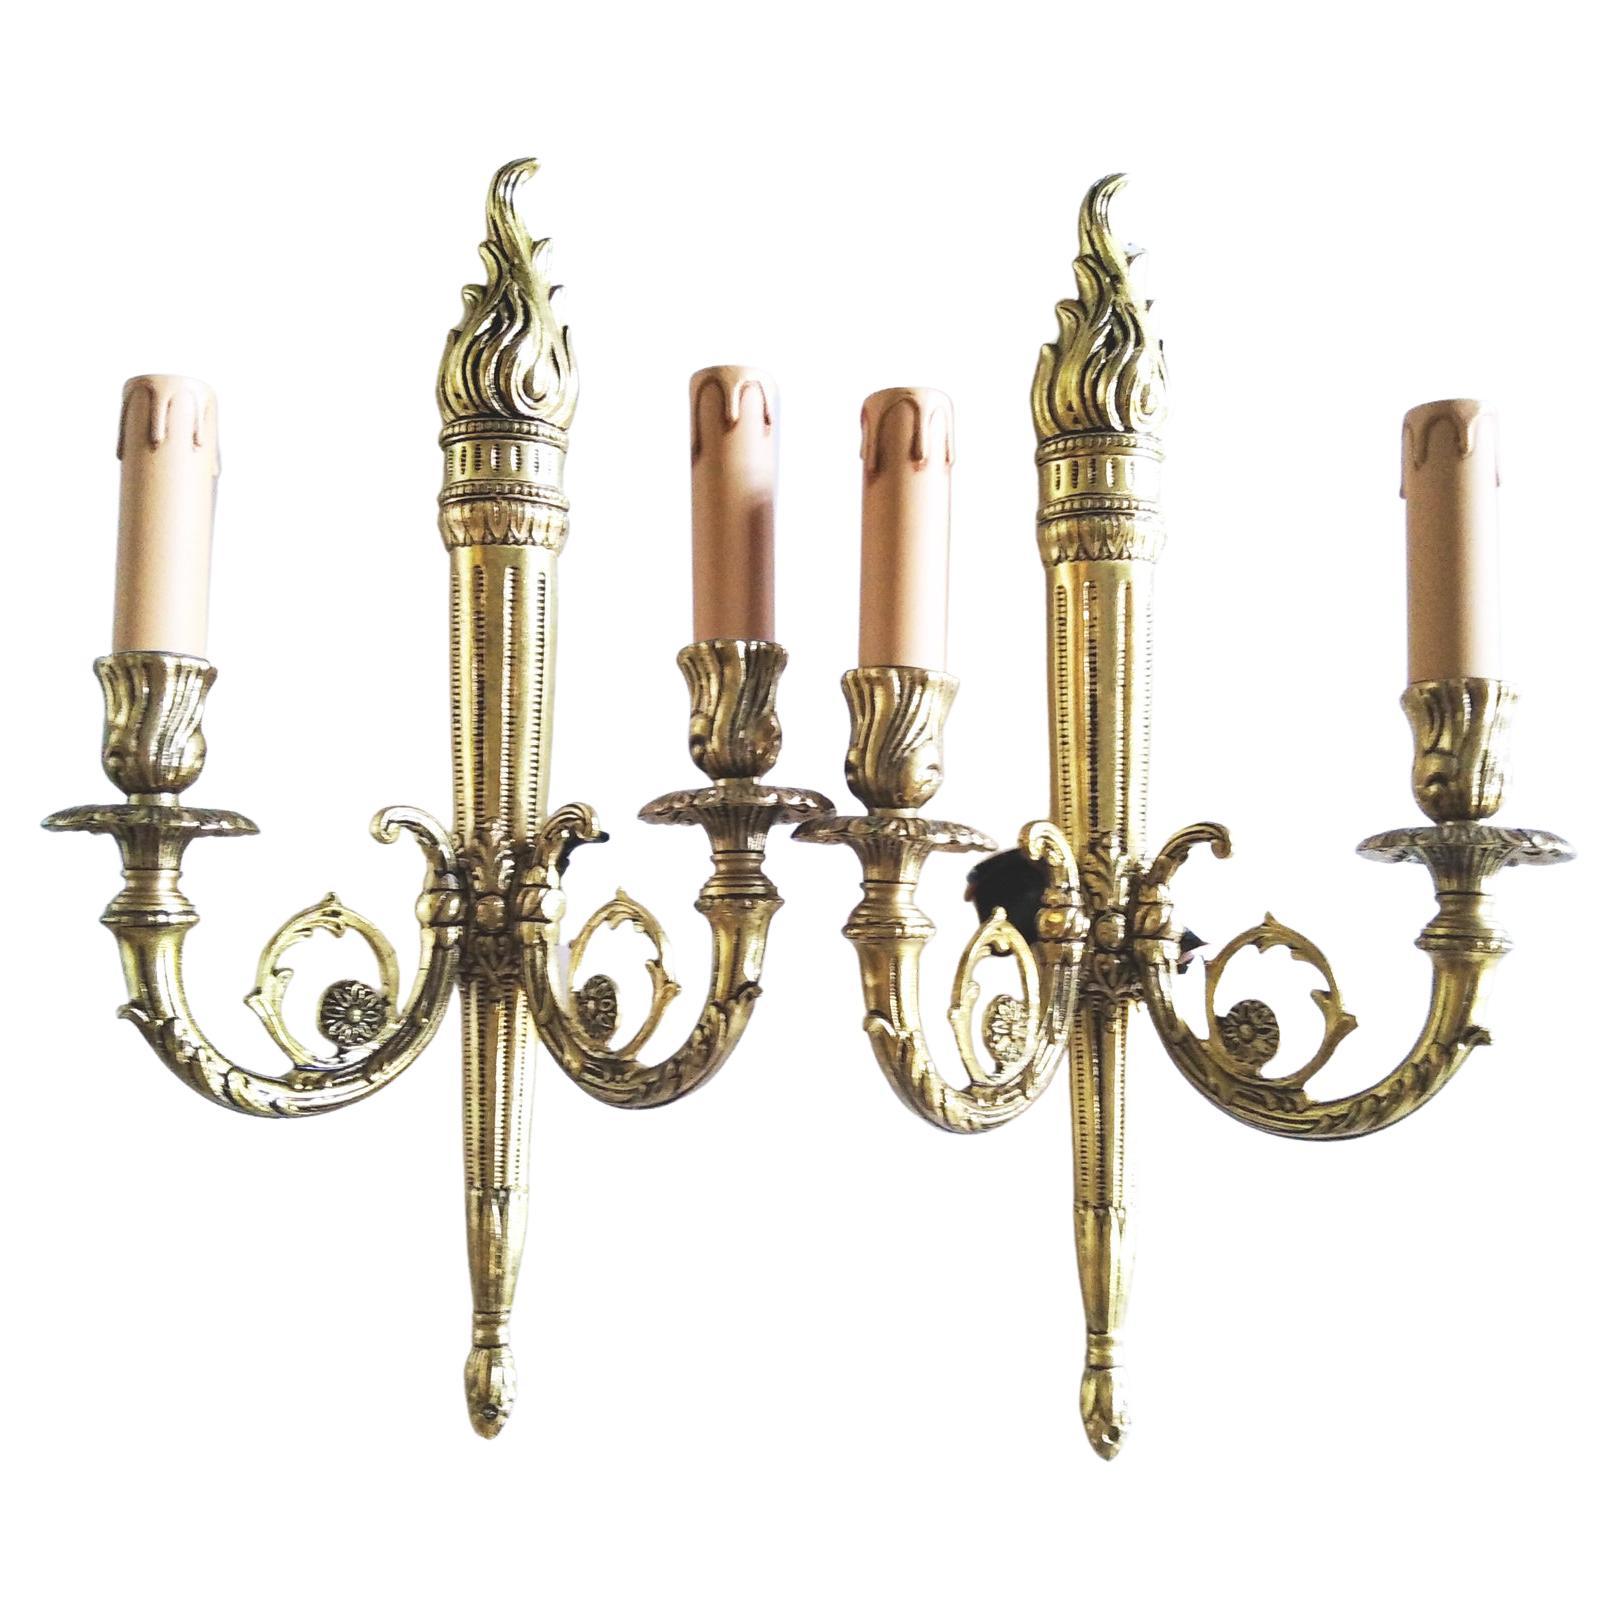 Wall sconces Louis XVI style two-light wall sconces
 bronze or brass.

Very beautiful and elegant sconces


This model of French wall lamps or sconces have illuminated the Grand Hotels and Cafes with French-style decoration in Europe and around the